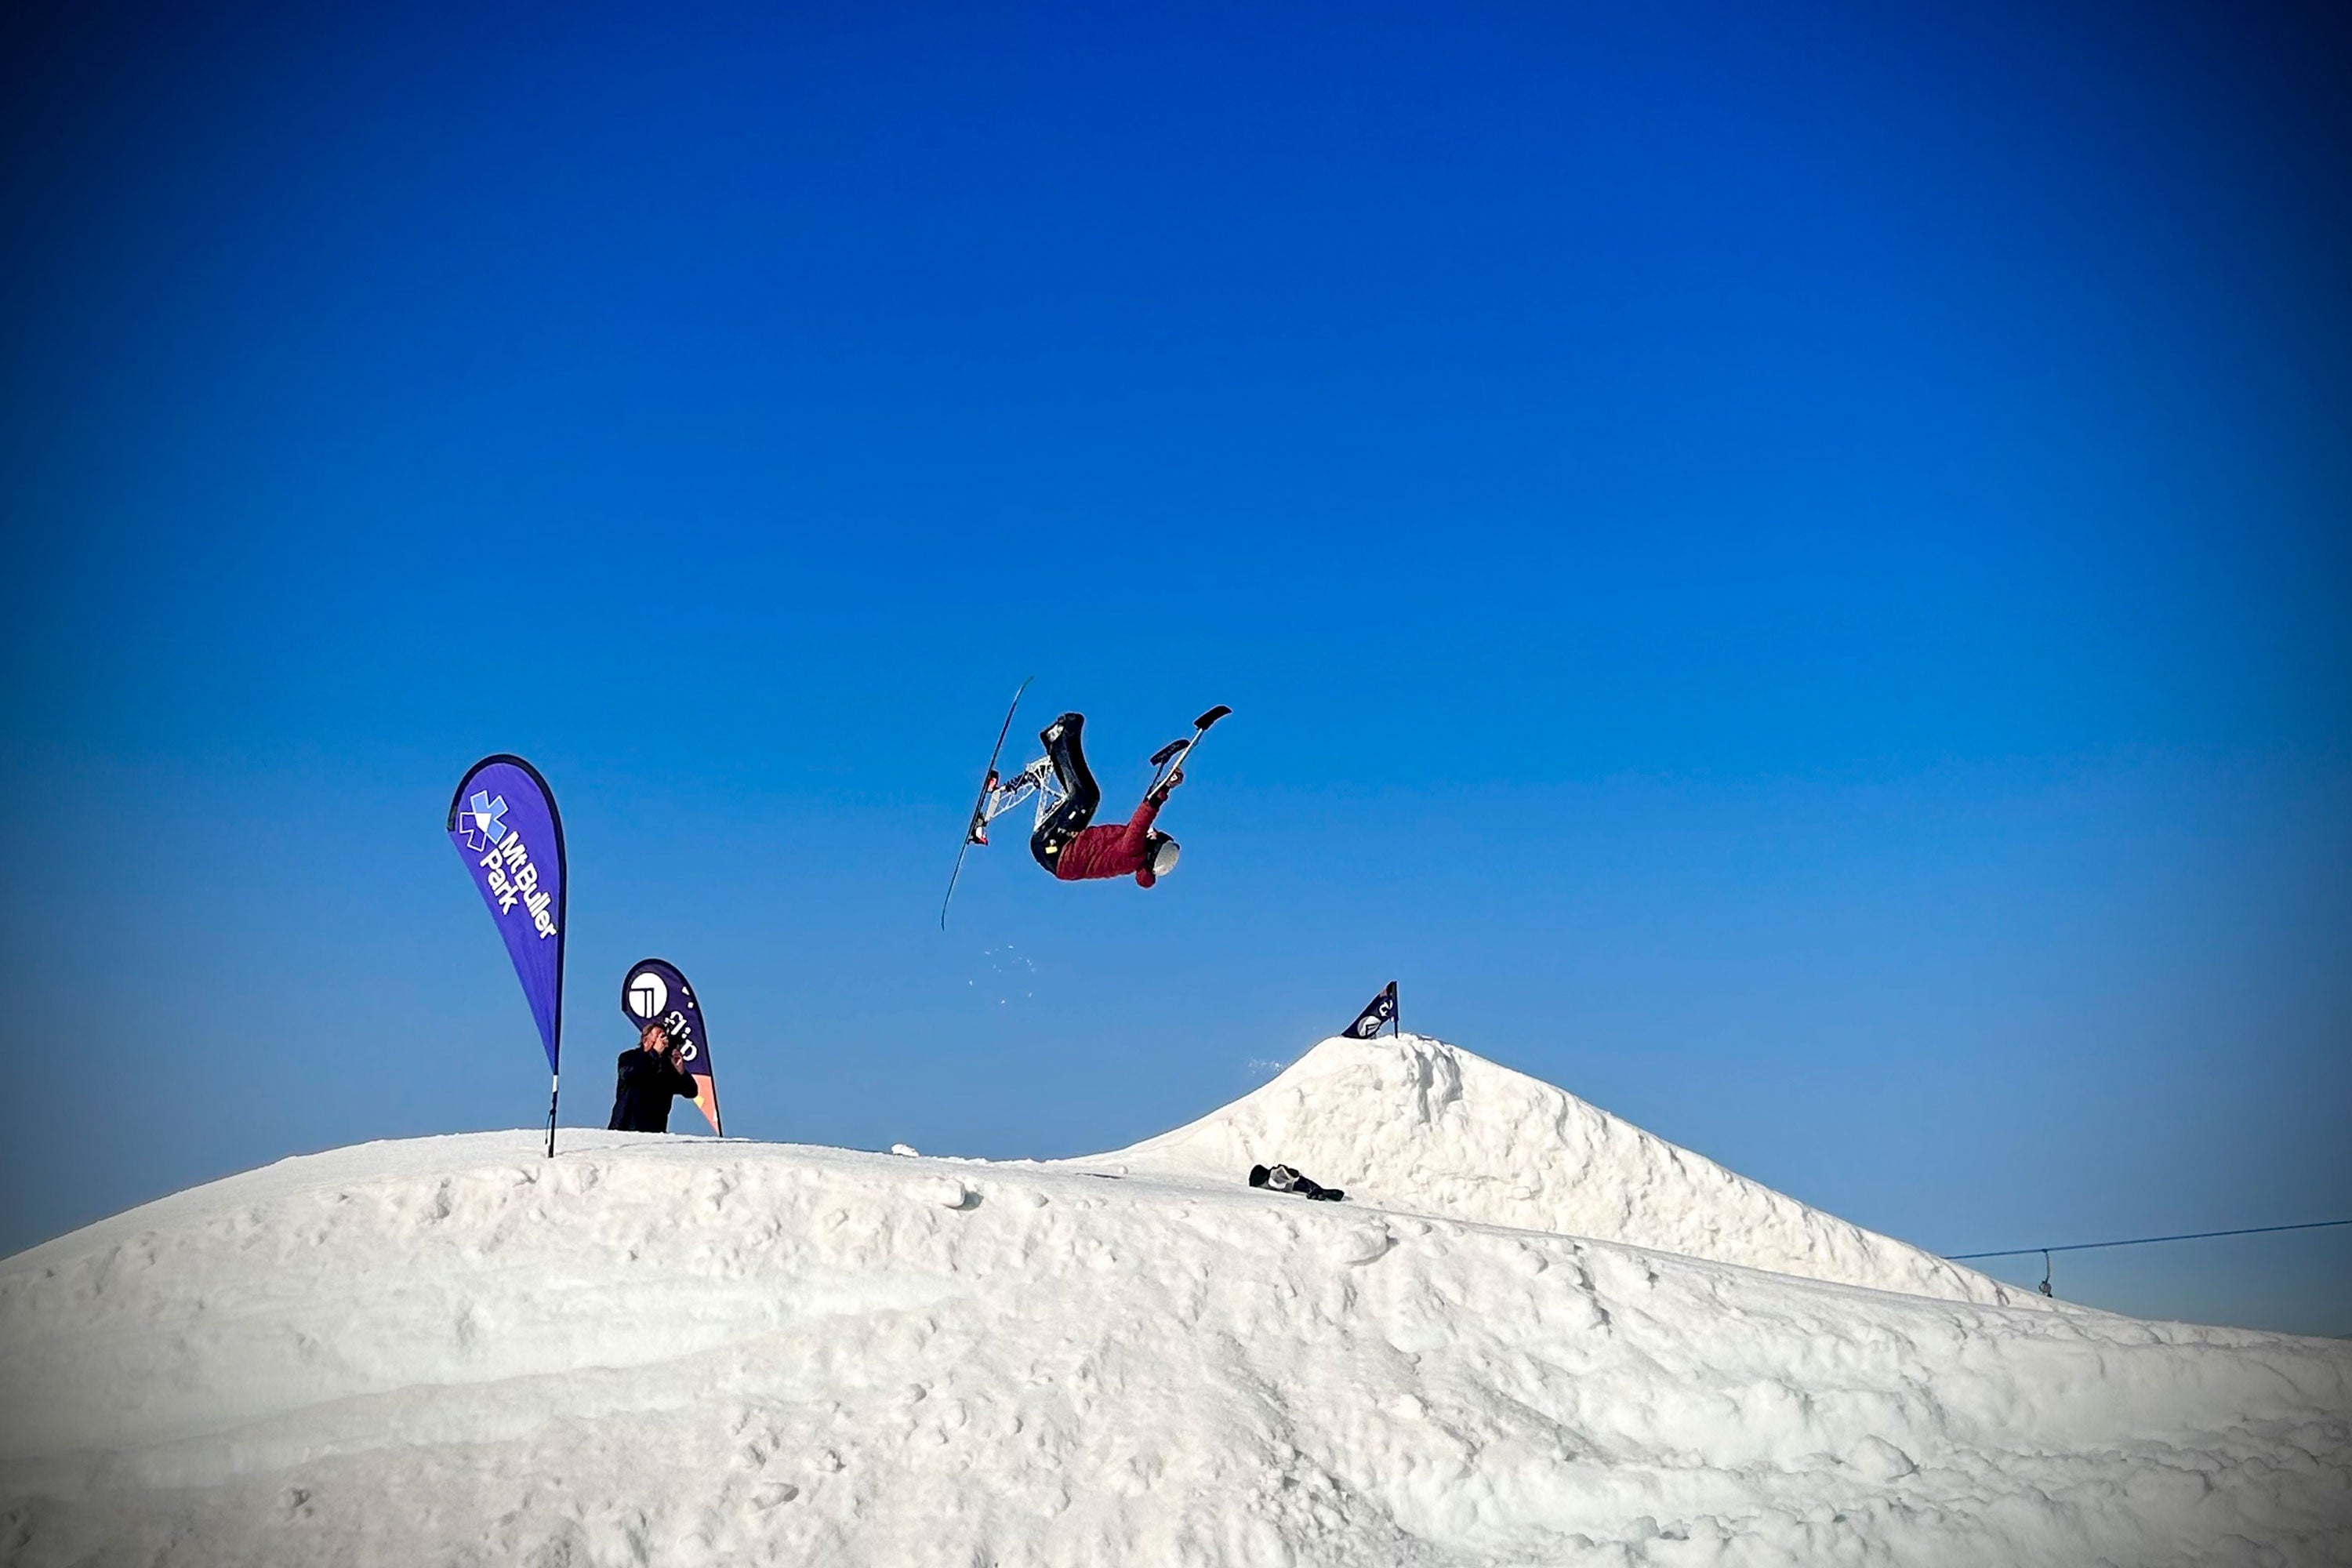 Trevor Kennison in the middle of a back flip while skiing, with blue sky behind